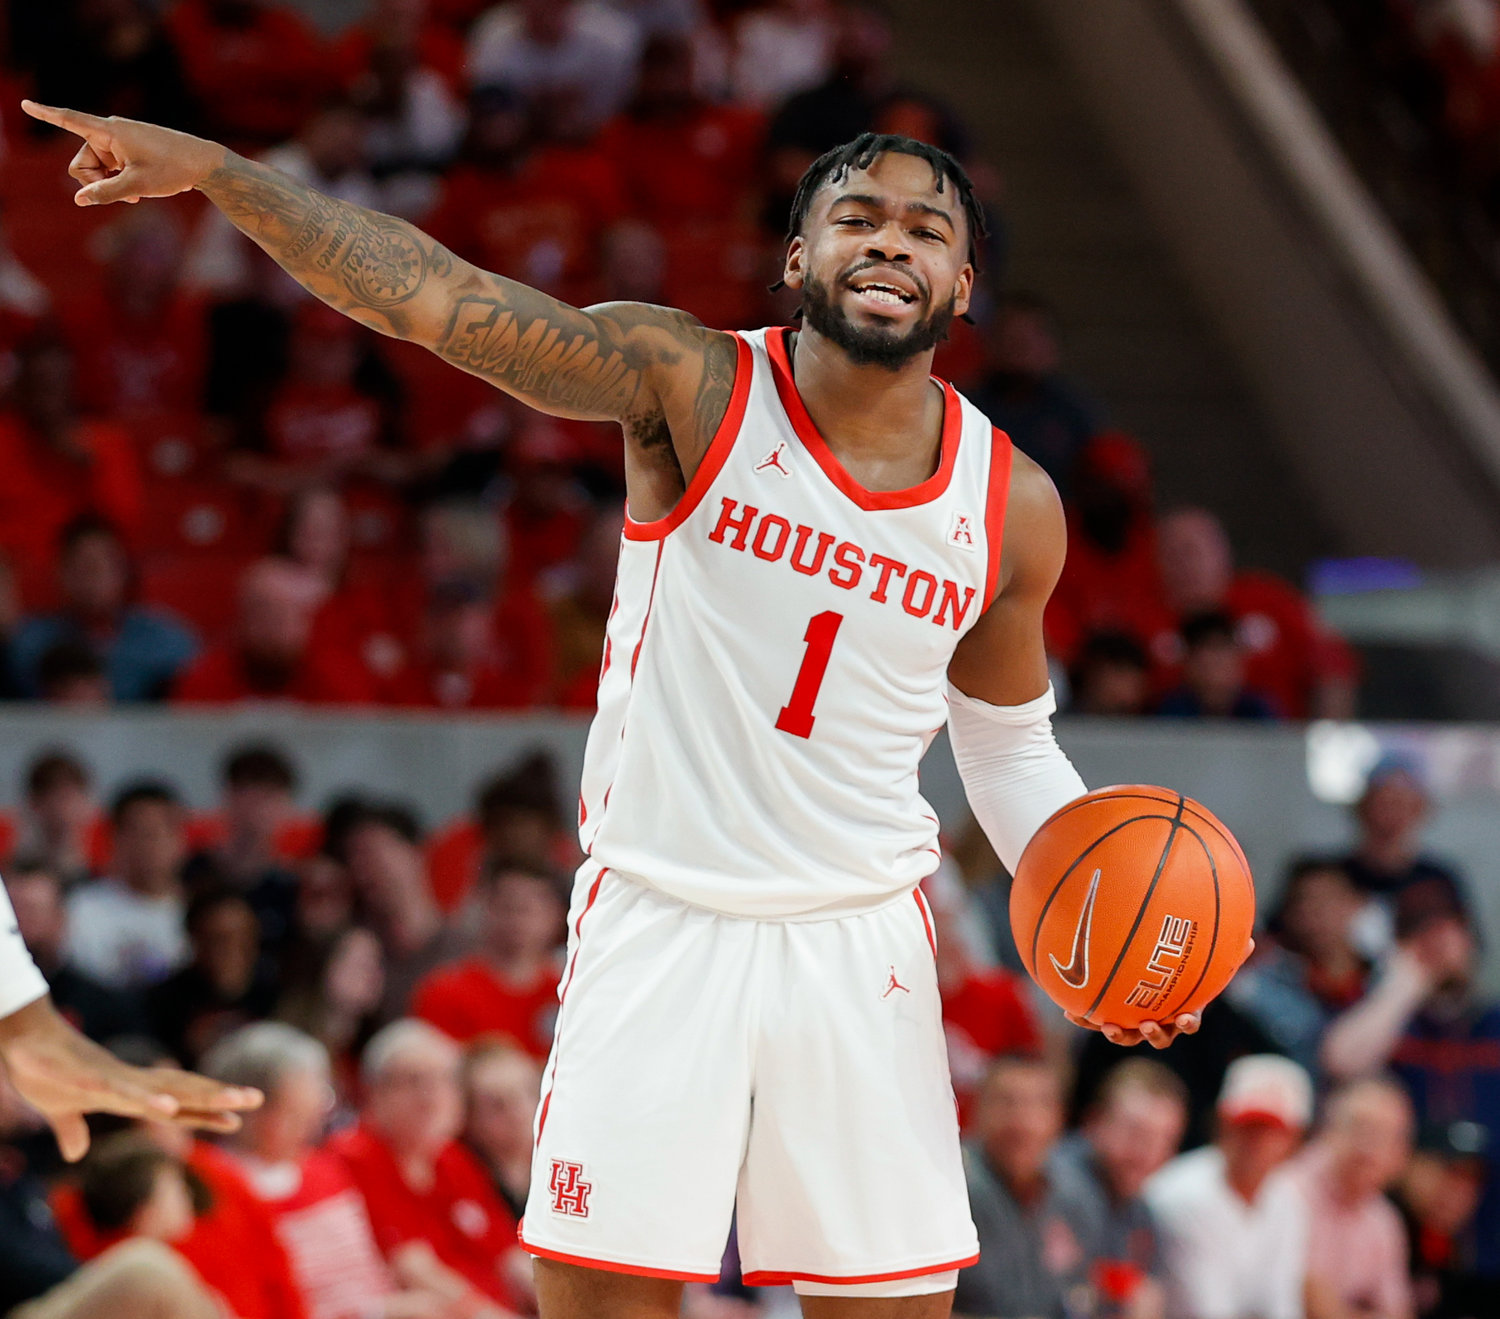 Houston guard Jamal Shead (1) gestures to his teammates during an NCAA men’s basketball game between the Houston Cougars and the Southern Methodist Mustangs on Jan. 5, 2023 in Houston. Houston won, 87-53,